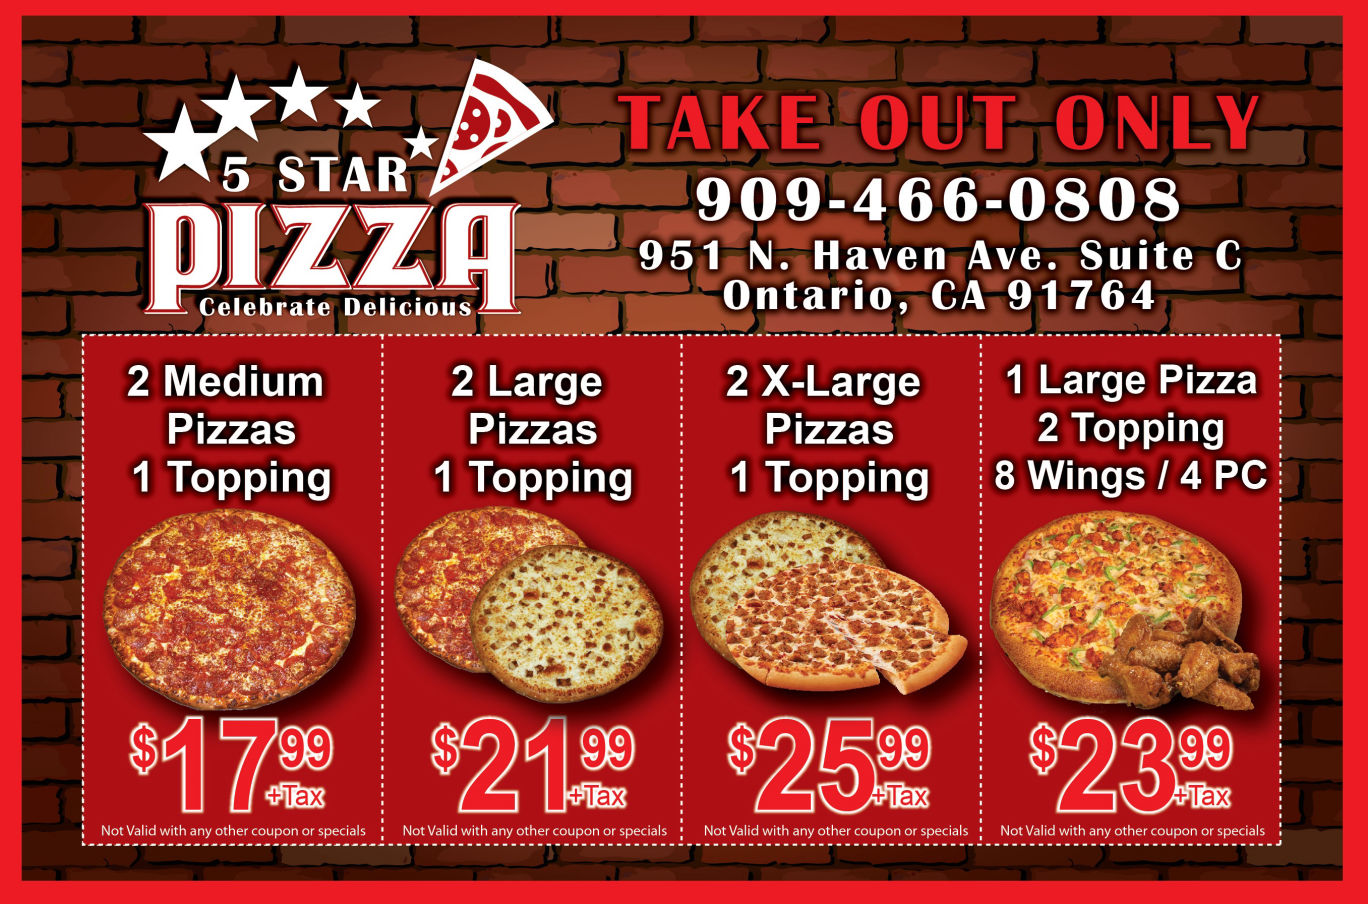 5 star pizza coupon